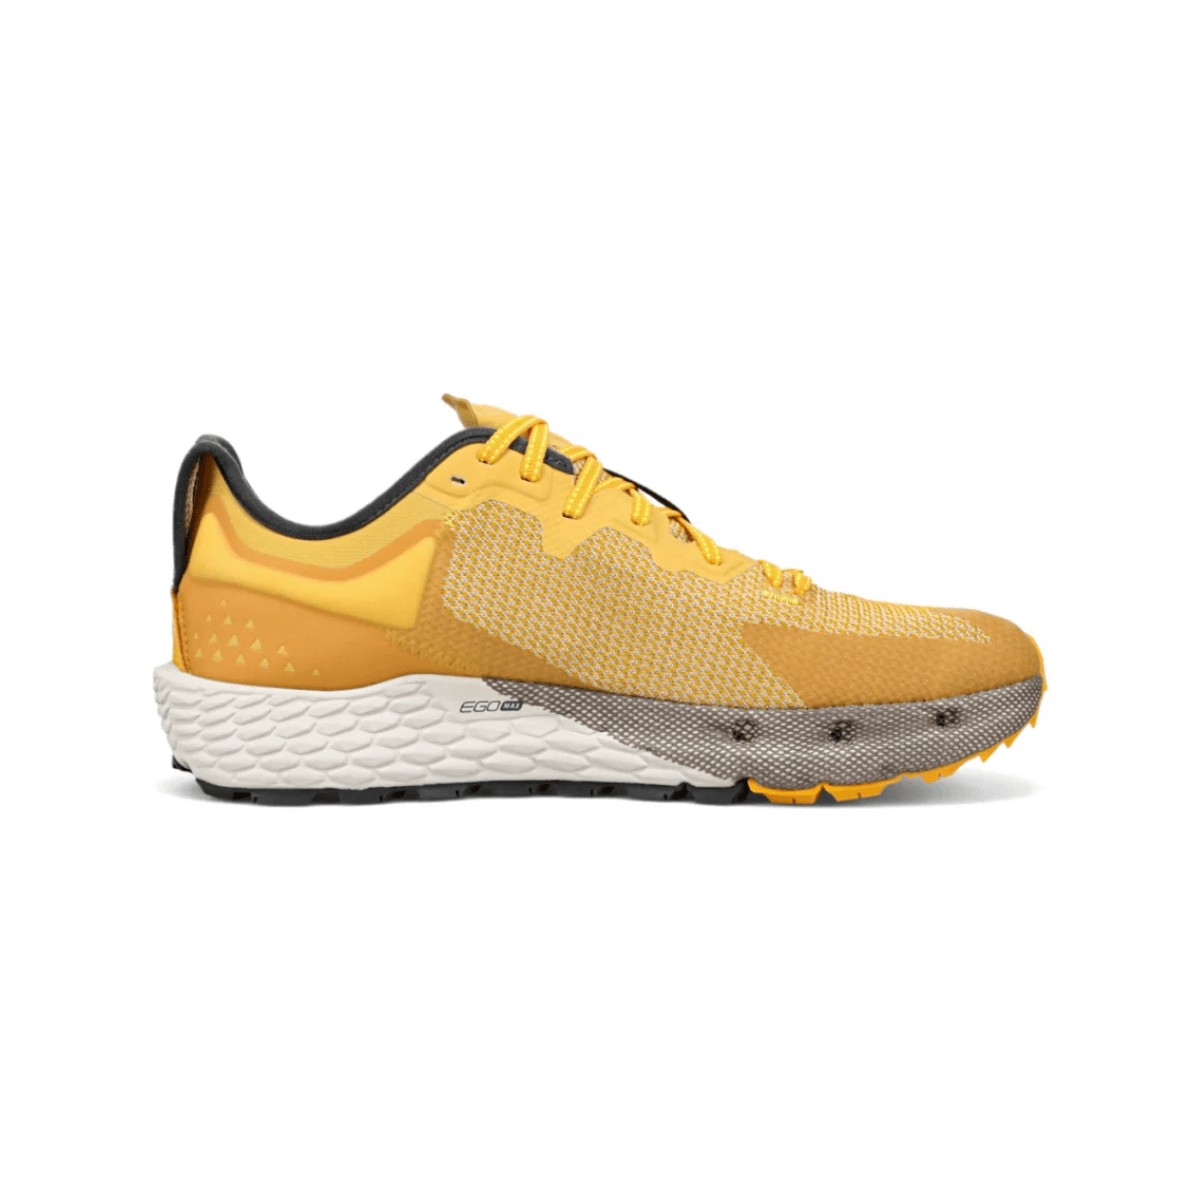 Chaussures Altra Timp 4 Griss Jaune AW22, Taille 42 - EUR